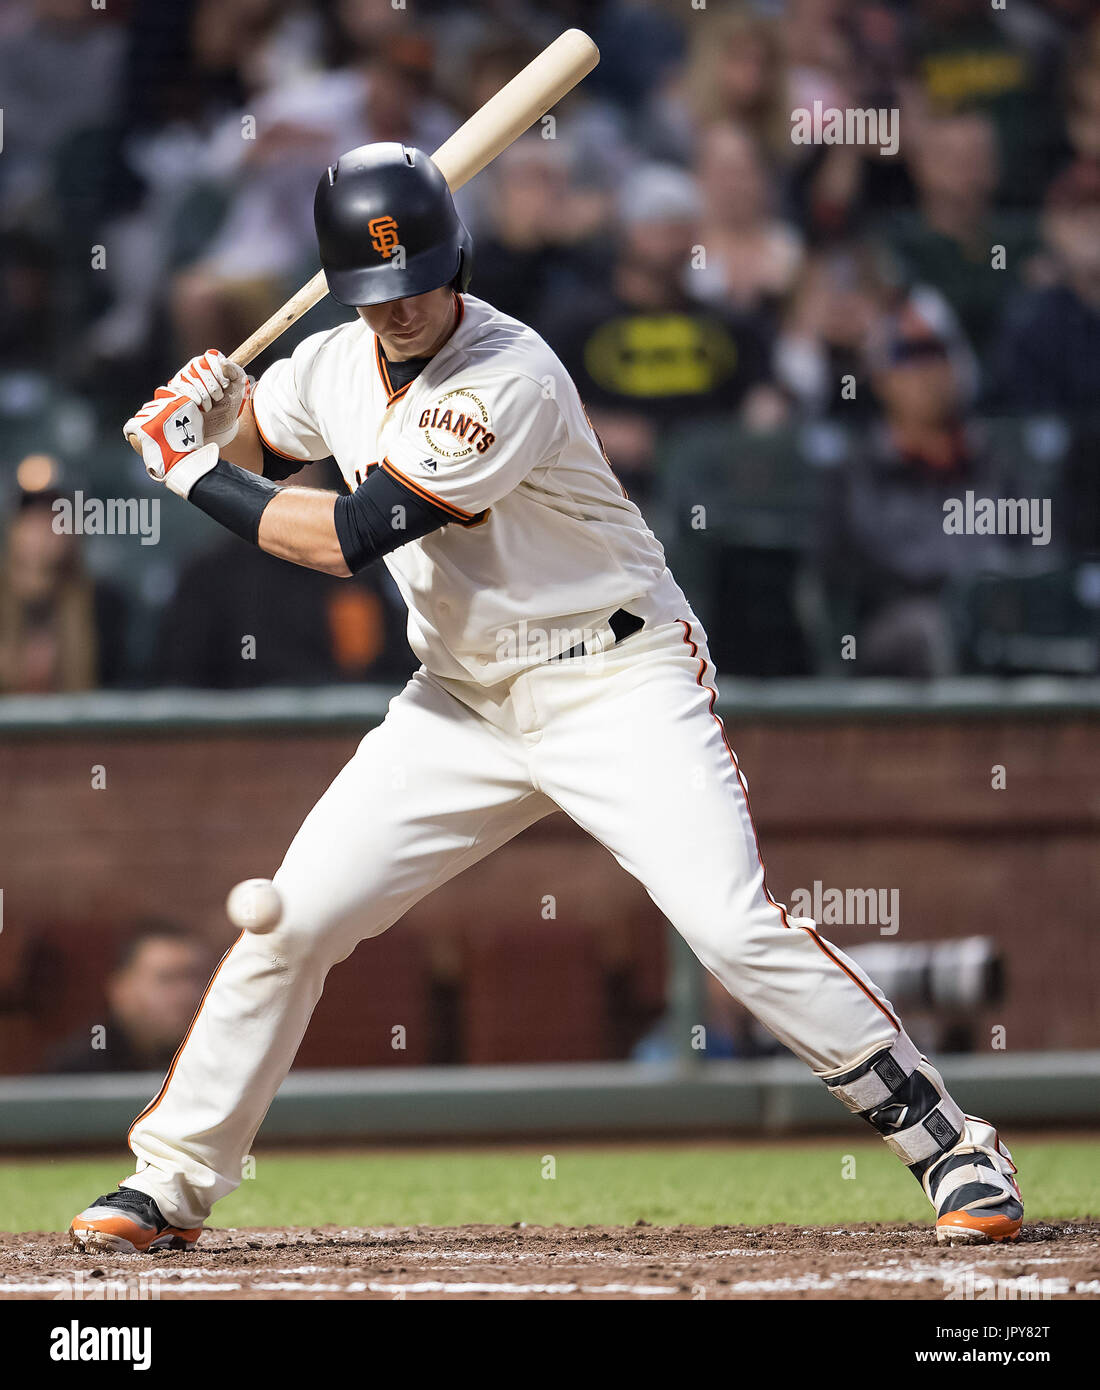 San Francisco, California, USA. 2nd August, 2017. San Francisco Giants catcher Buster Posey (28) taking a pitch in the fourth inning, during a MLB game between the Oakland Athletics and the San Francisco Giants at AT&T Park in San Francisco, California. Valerie Shoaps/CSM/Alamy Live News Stock Photo